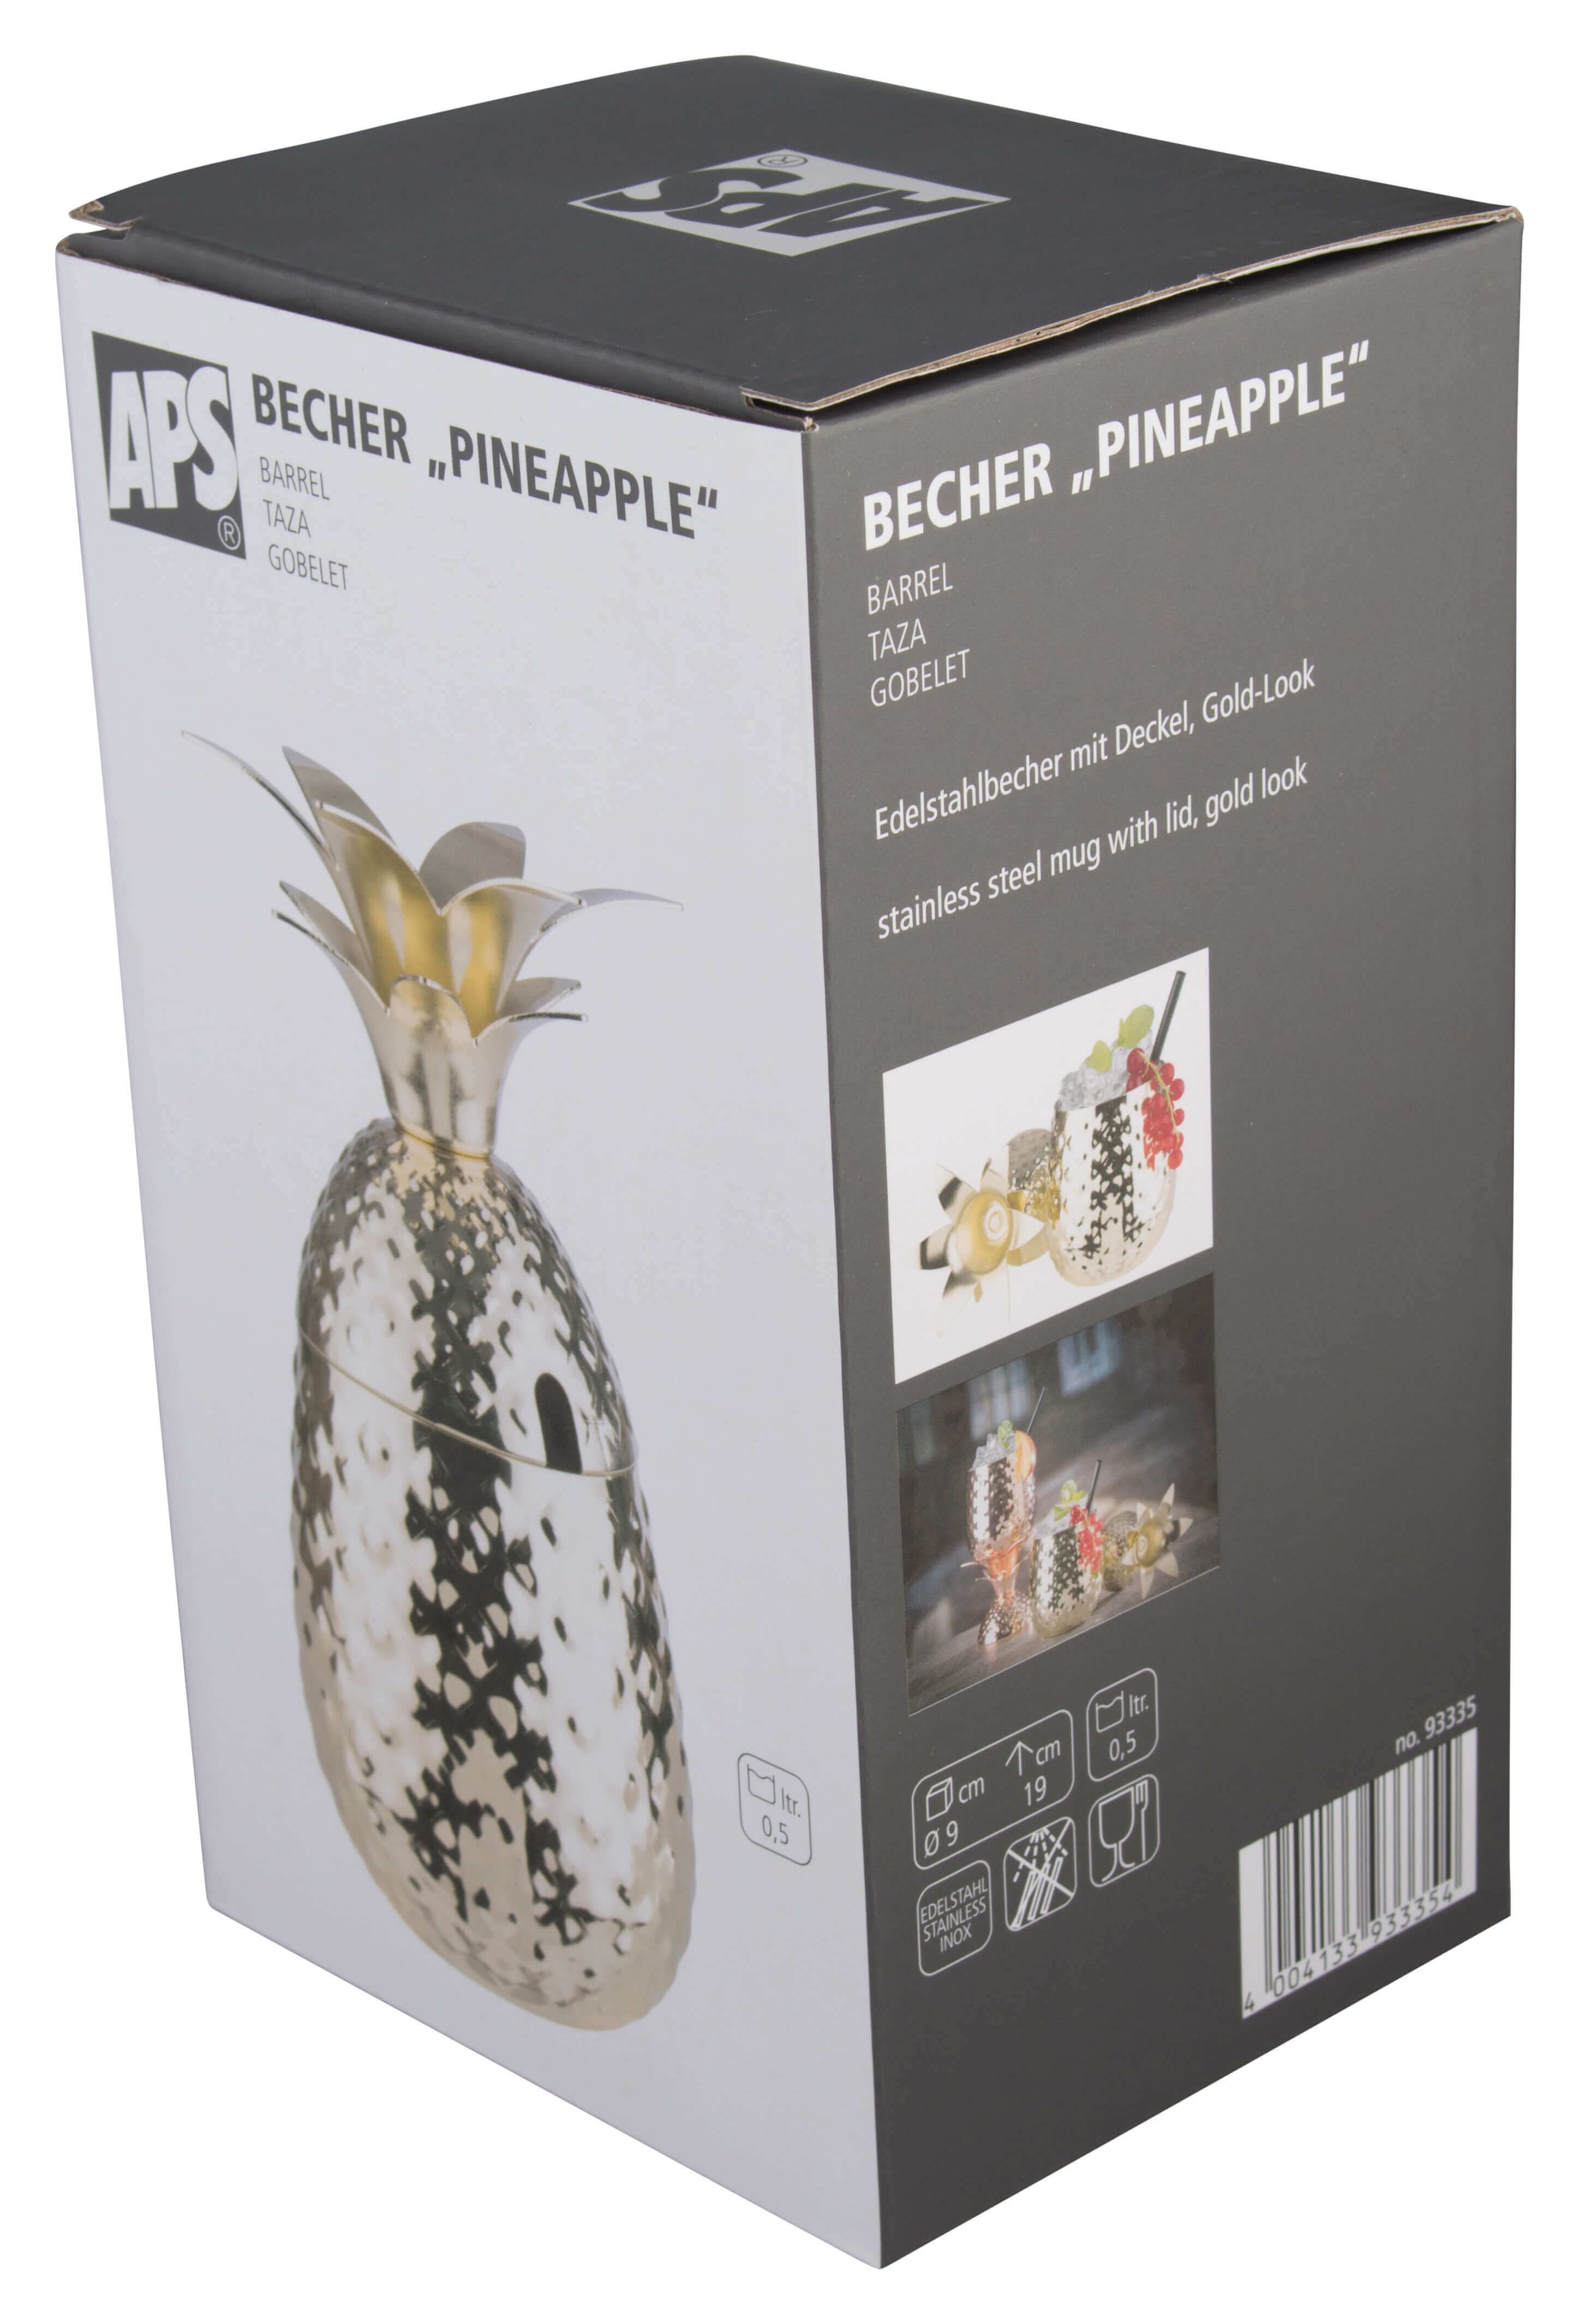 Stainless steel mug 'pineapple', with lid, gold look - 500ml